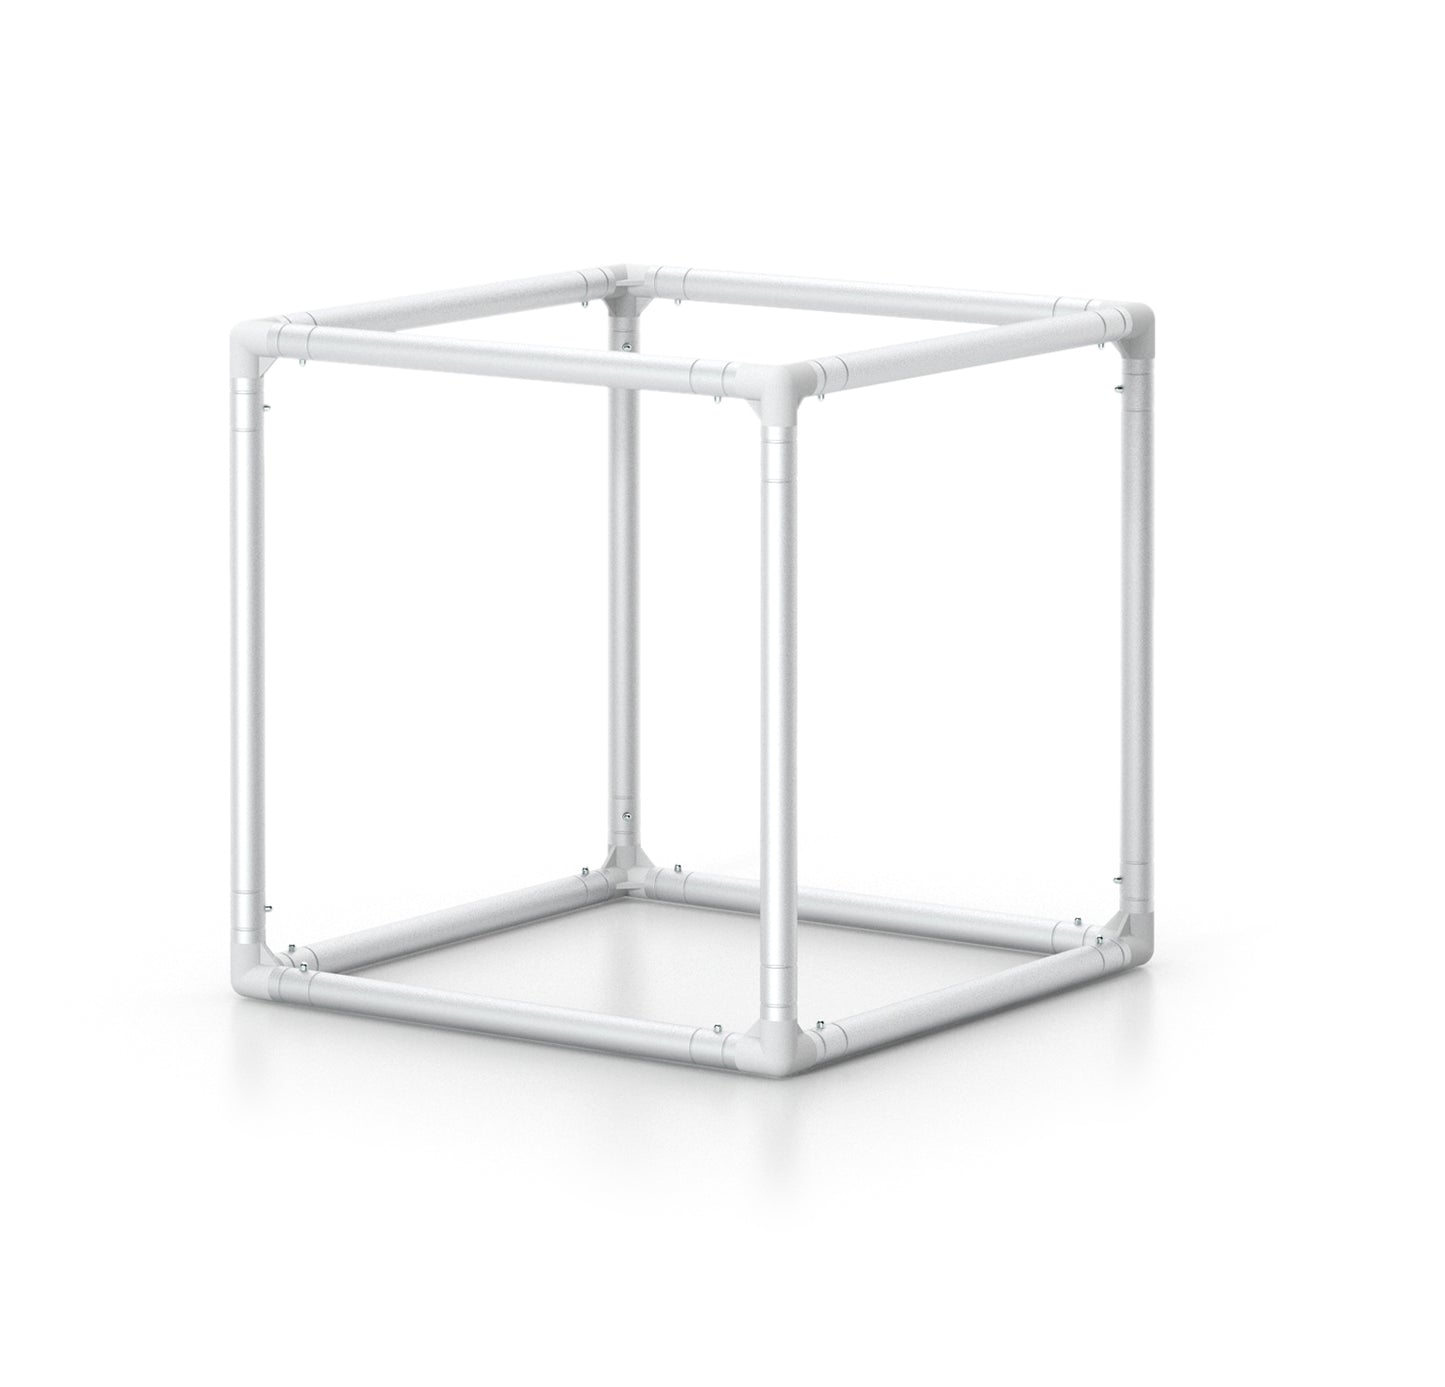 Assembled aluminum tubing cube with plastic corners which you can buy as parts